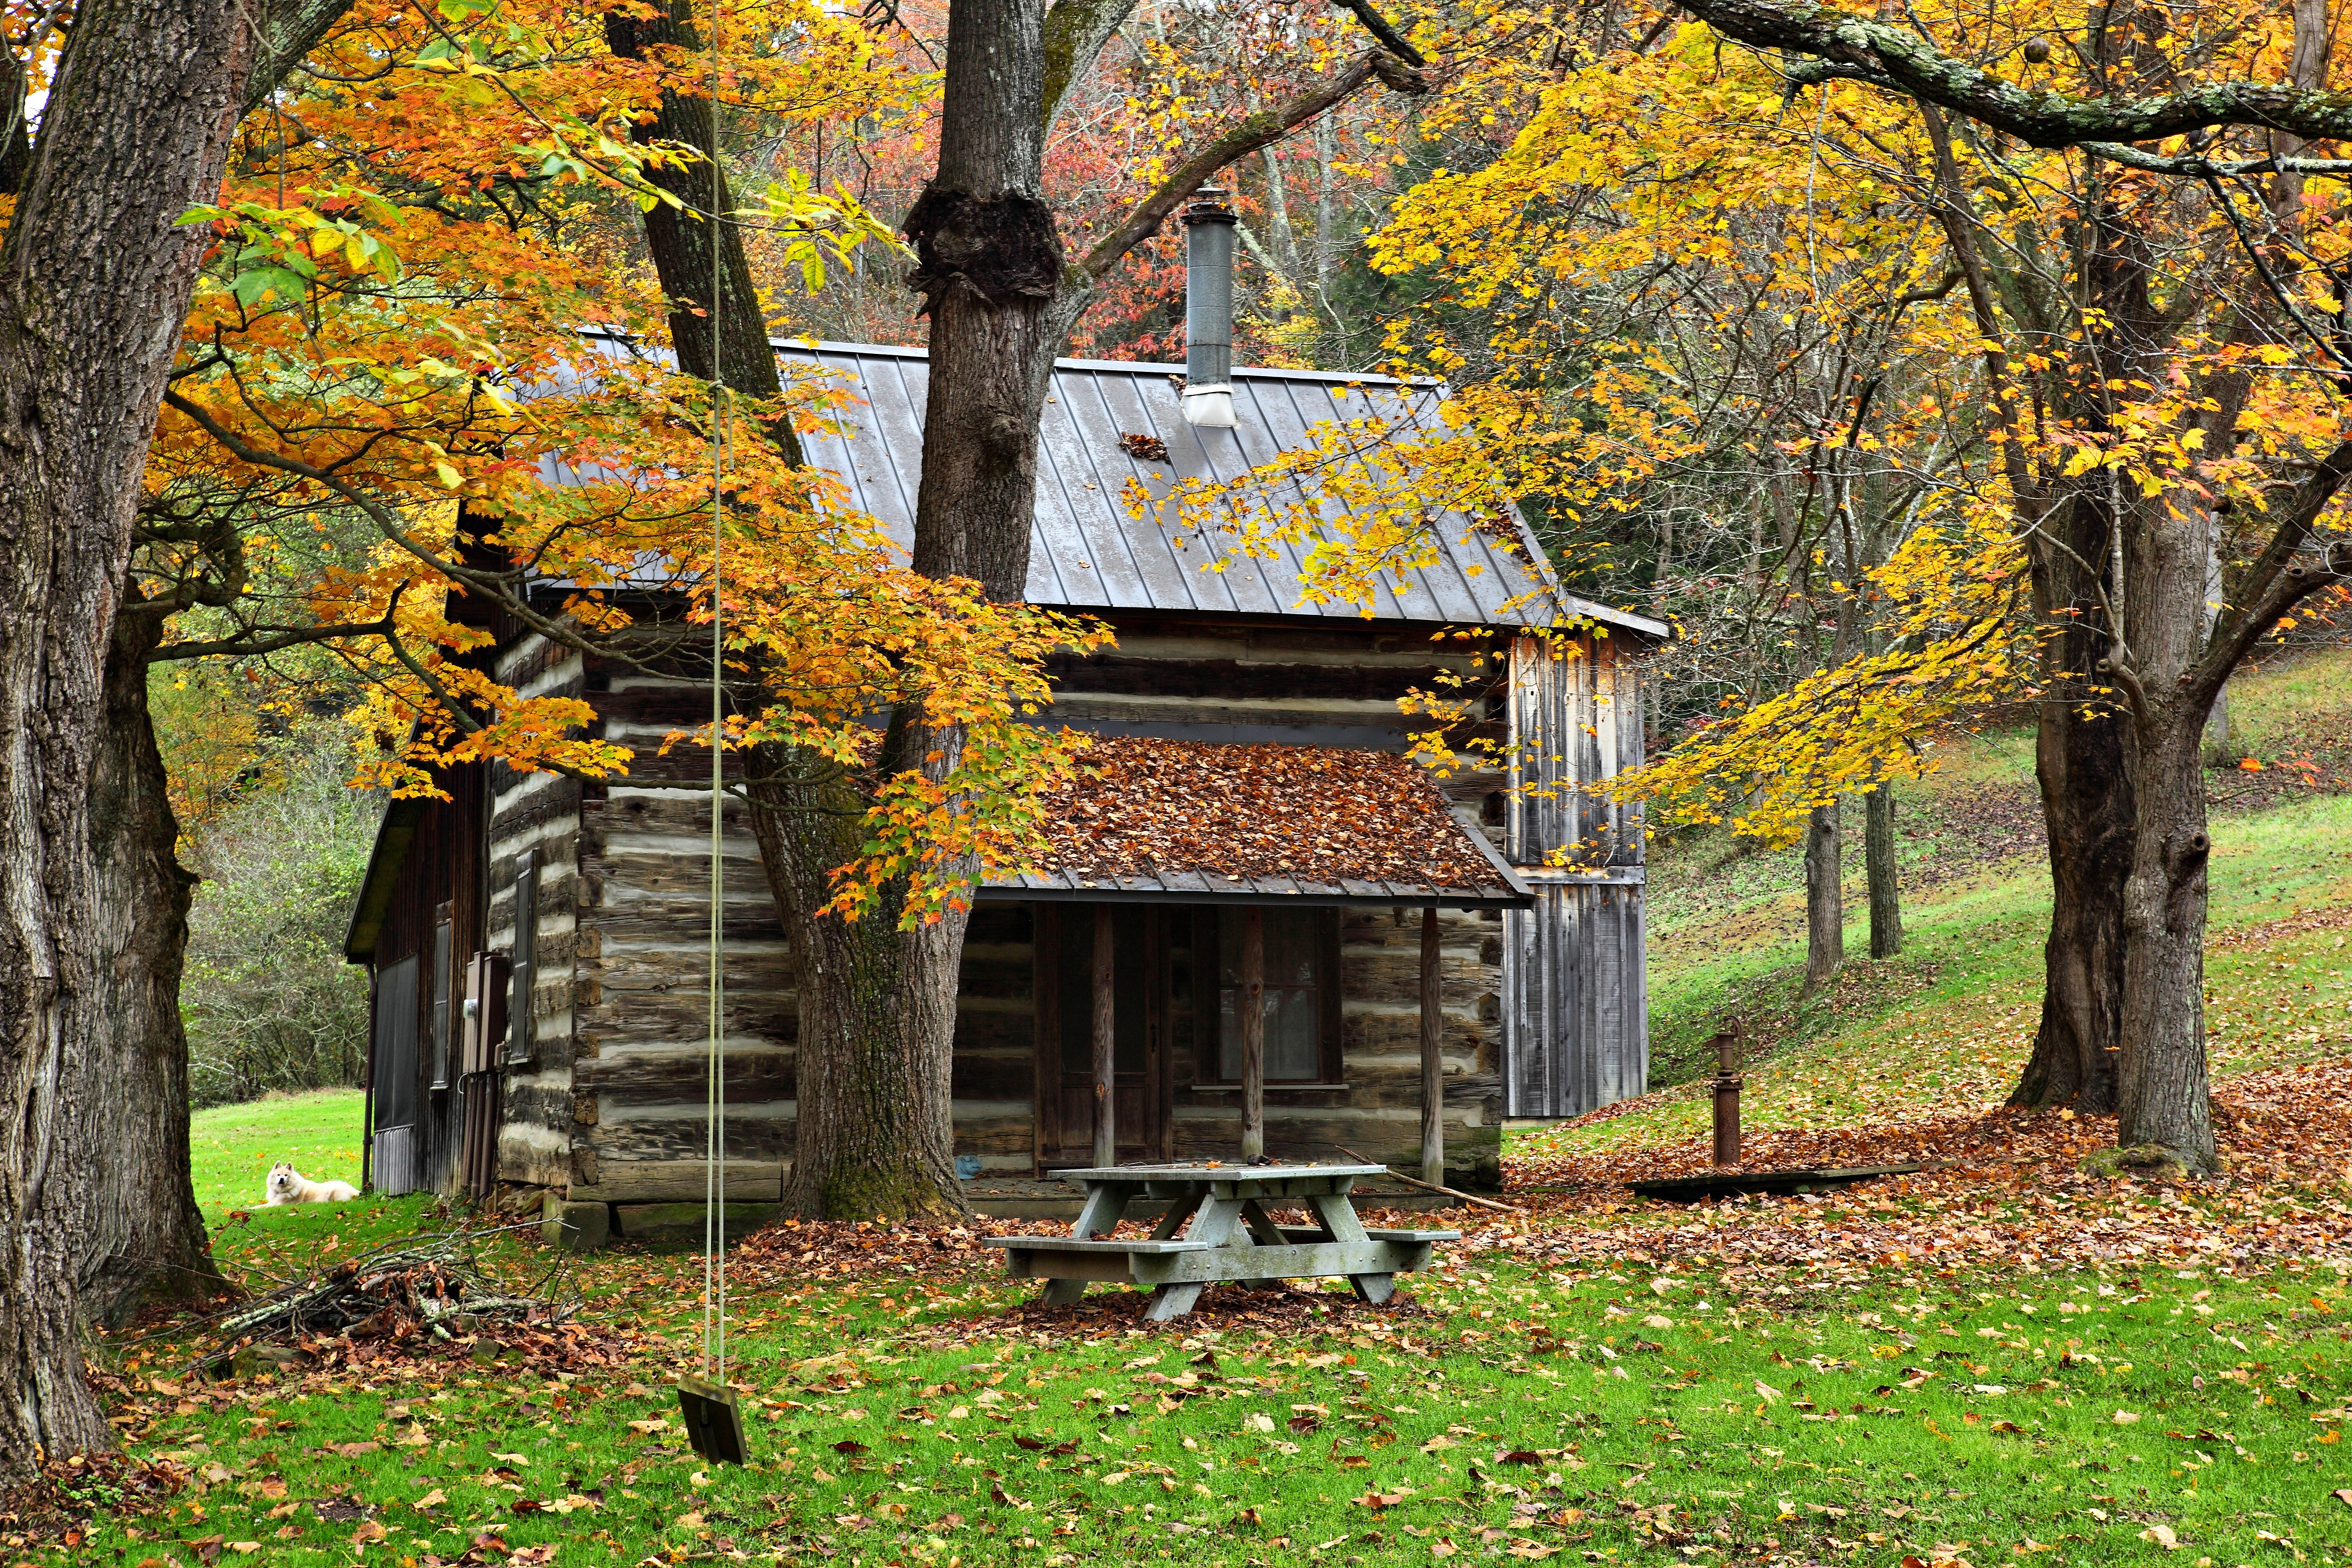 An Authentic Country Cabin In The Woods During Fall Foliage Season